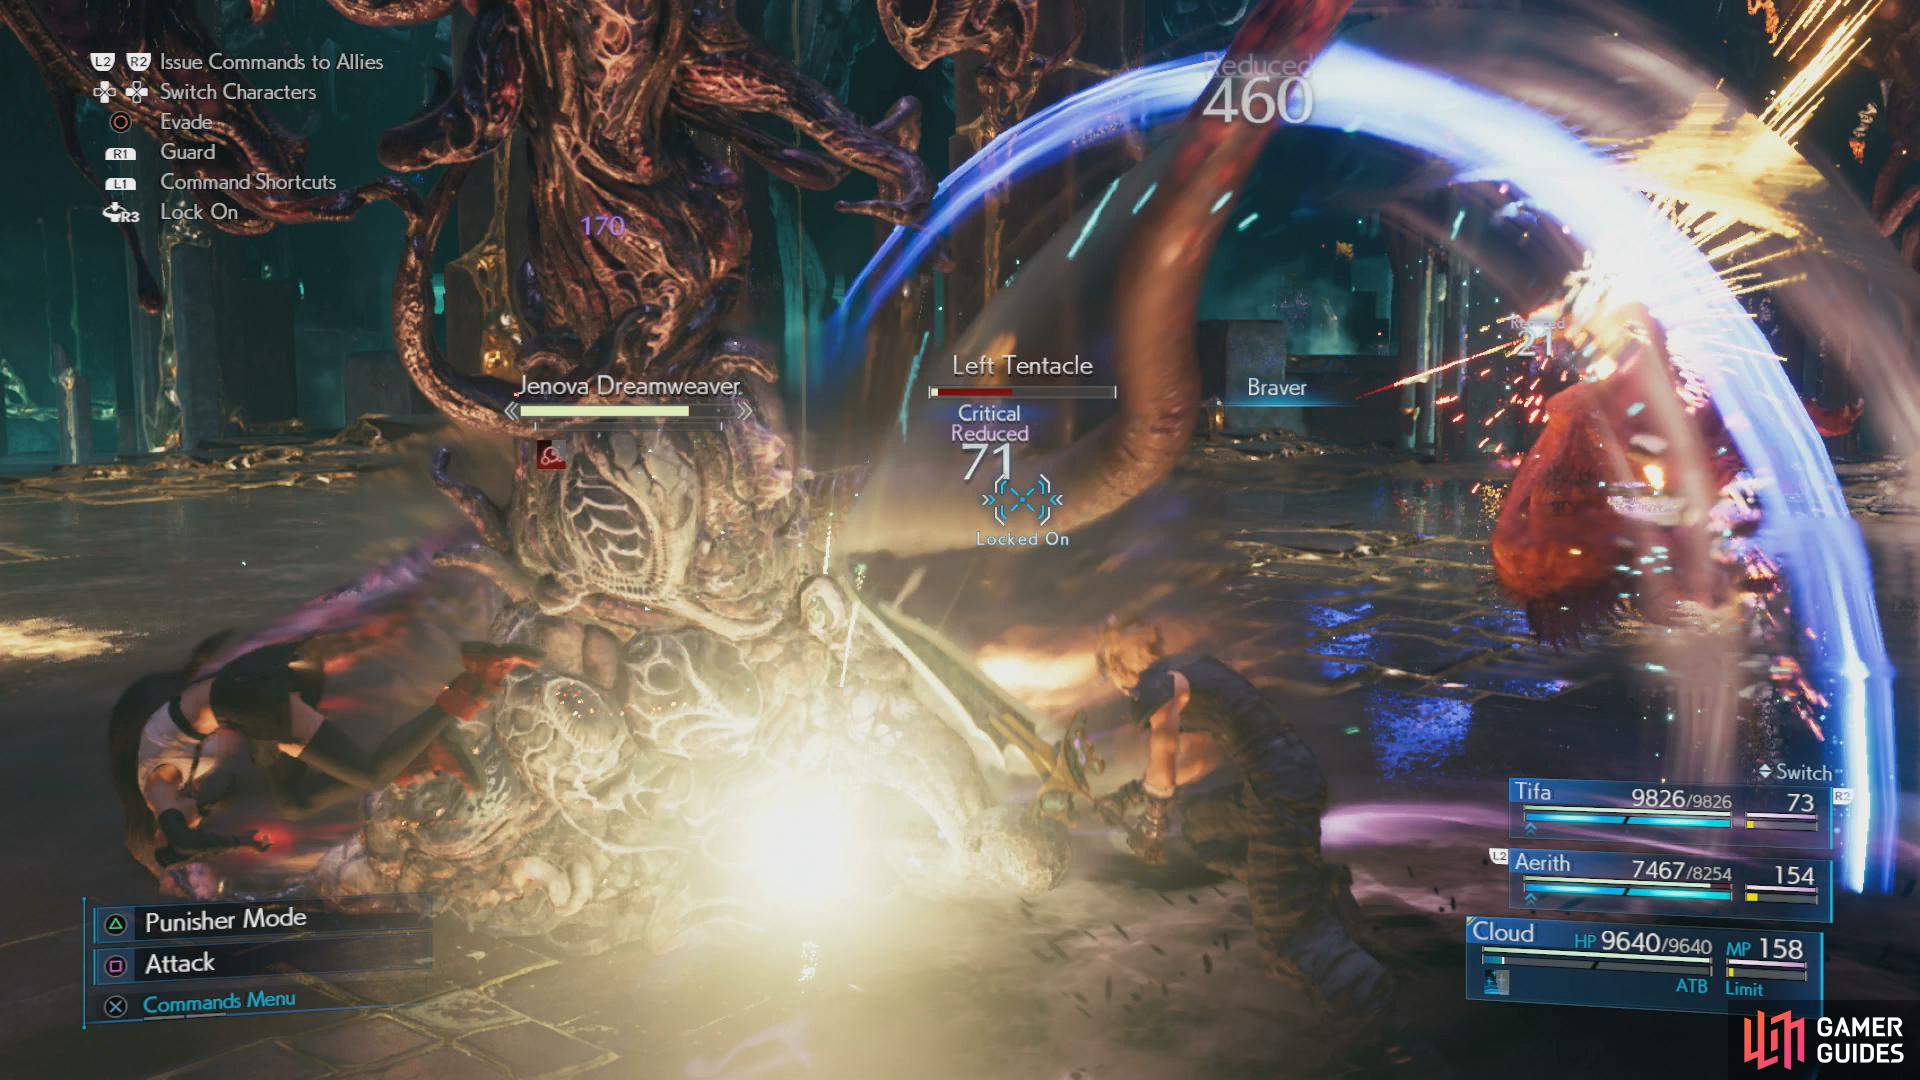 Abilities like "Braver" will remove tentacles and damage Jenova.